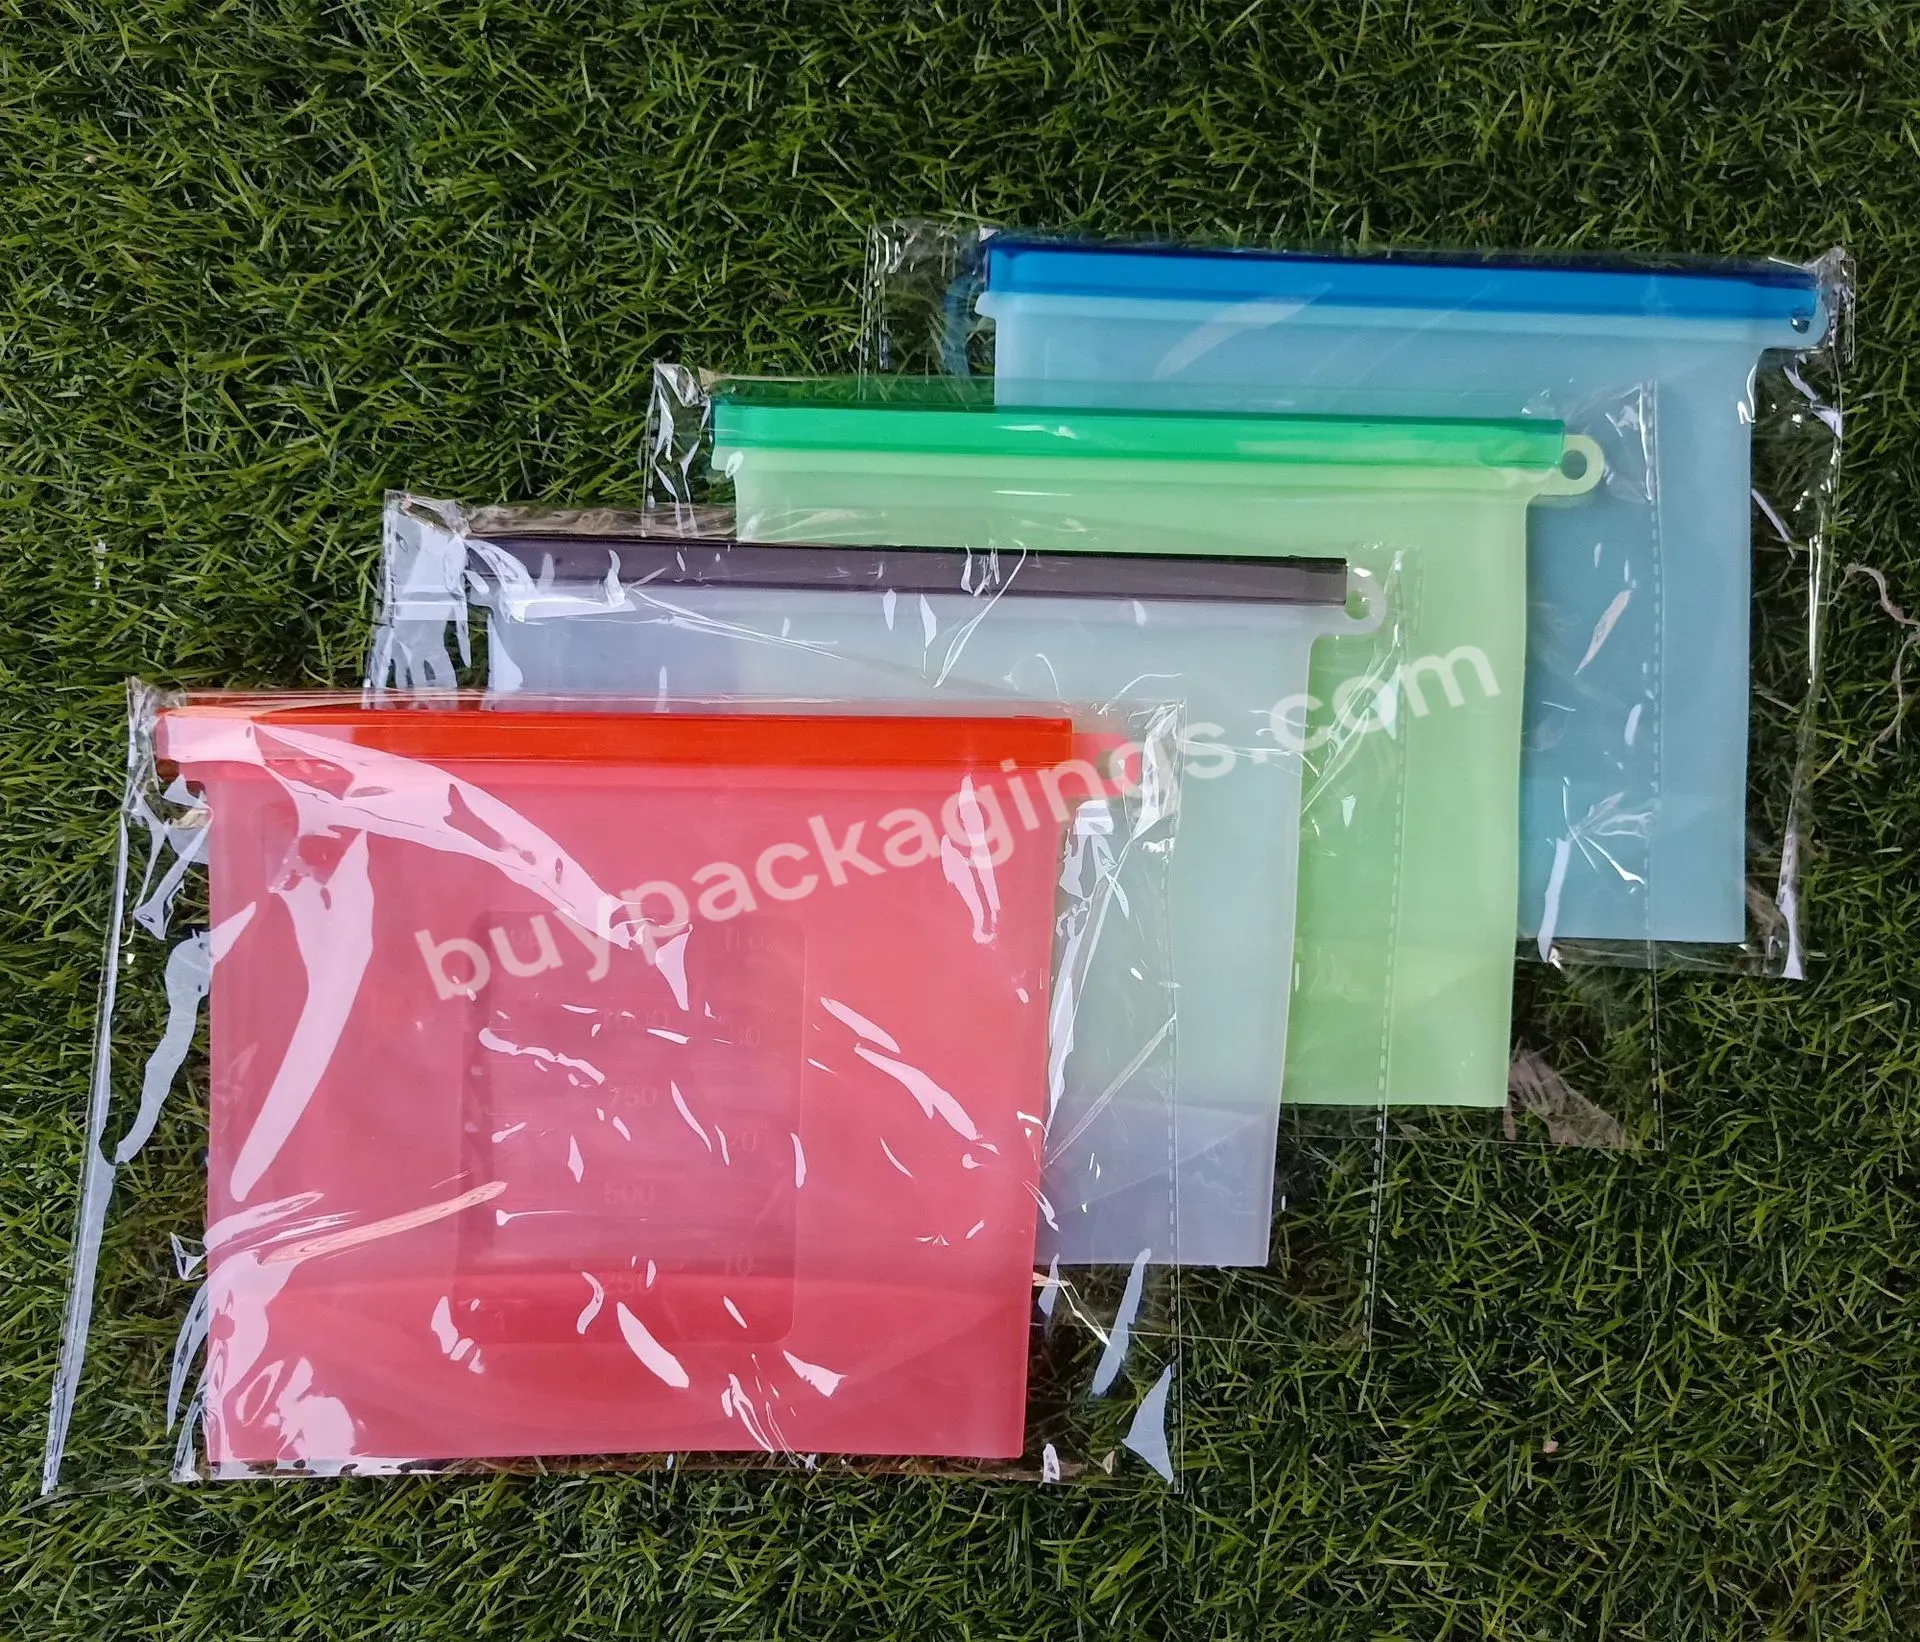 1500ml Airtight Seal Coffee Pouch Reusable Freezer Zip Lock Silicone Food Storage Bags Water Proof Sandwiches Bag - Buy Reusable Freezer Zip Lock Silicone Food Storage Bags,Water Proof Sandwiches Bag,1500ml Airtight Seal Coffee Pouch.